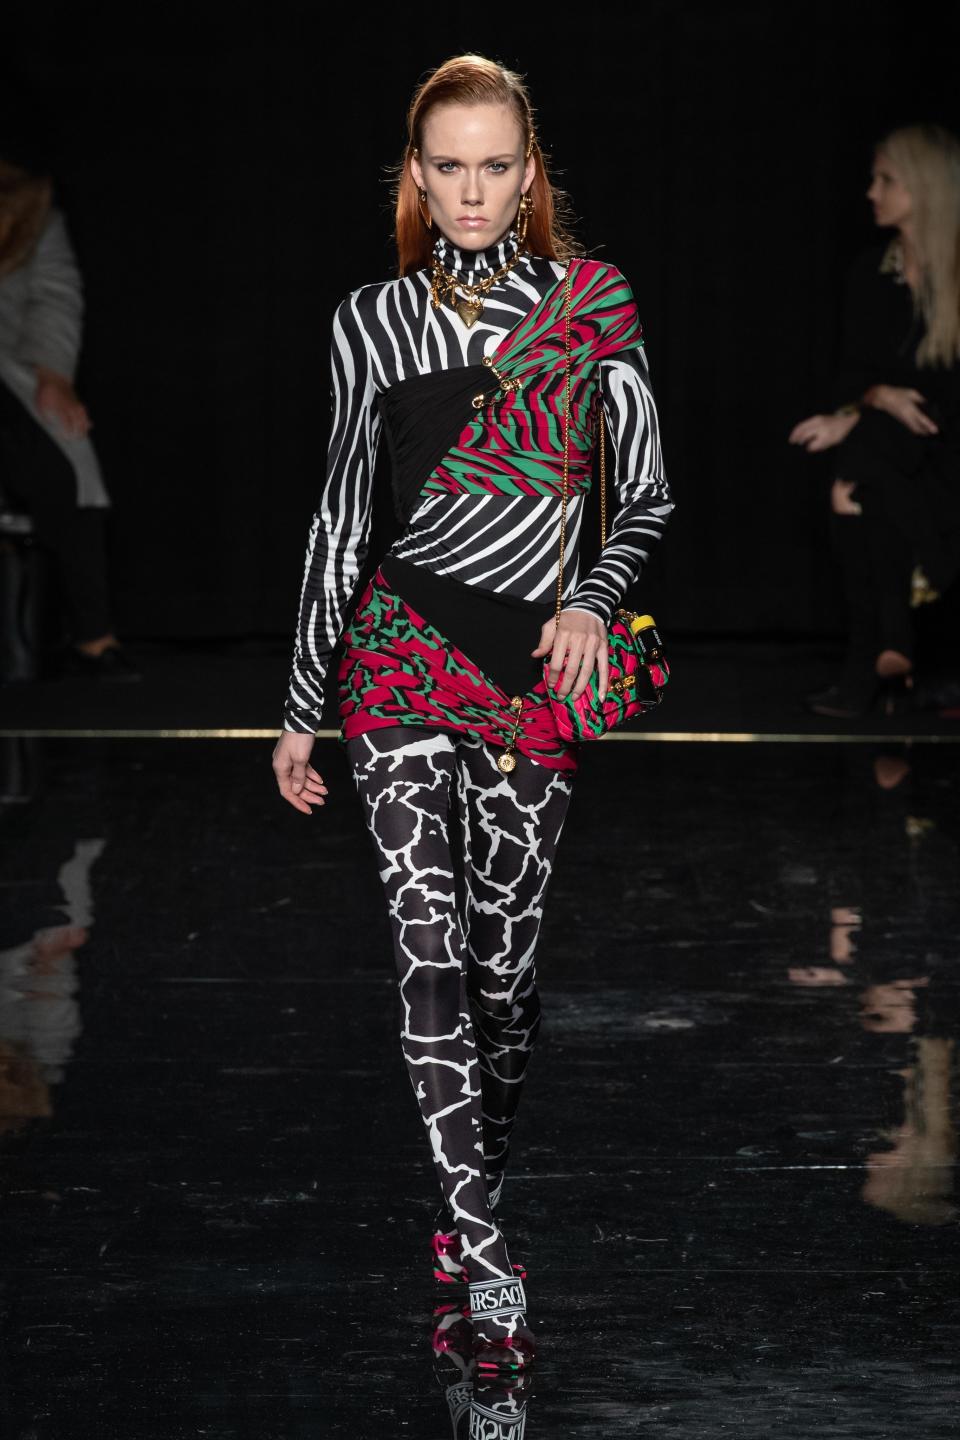 Versace’s Pre-Fall 2019 catsuit, with its mixed animal prints and color-blocking, will make the red carpet photographers go wild.